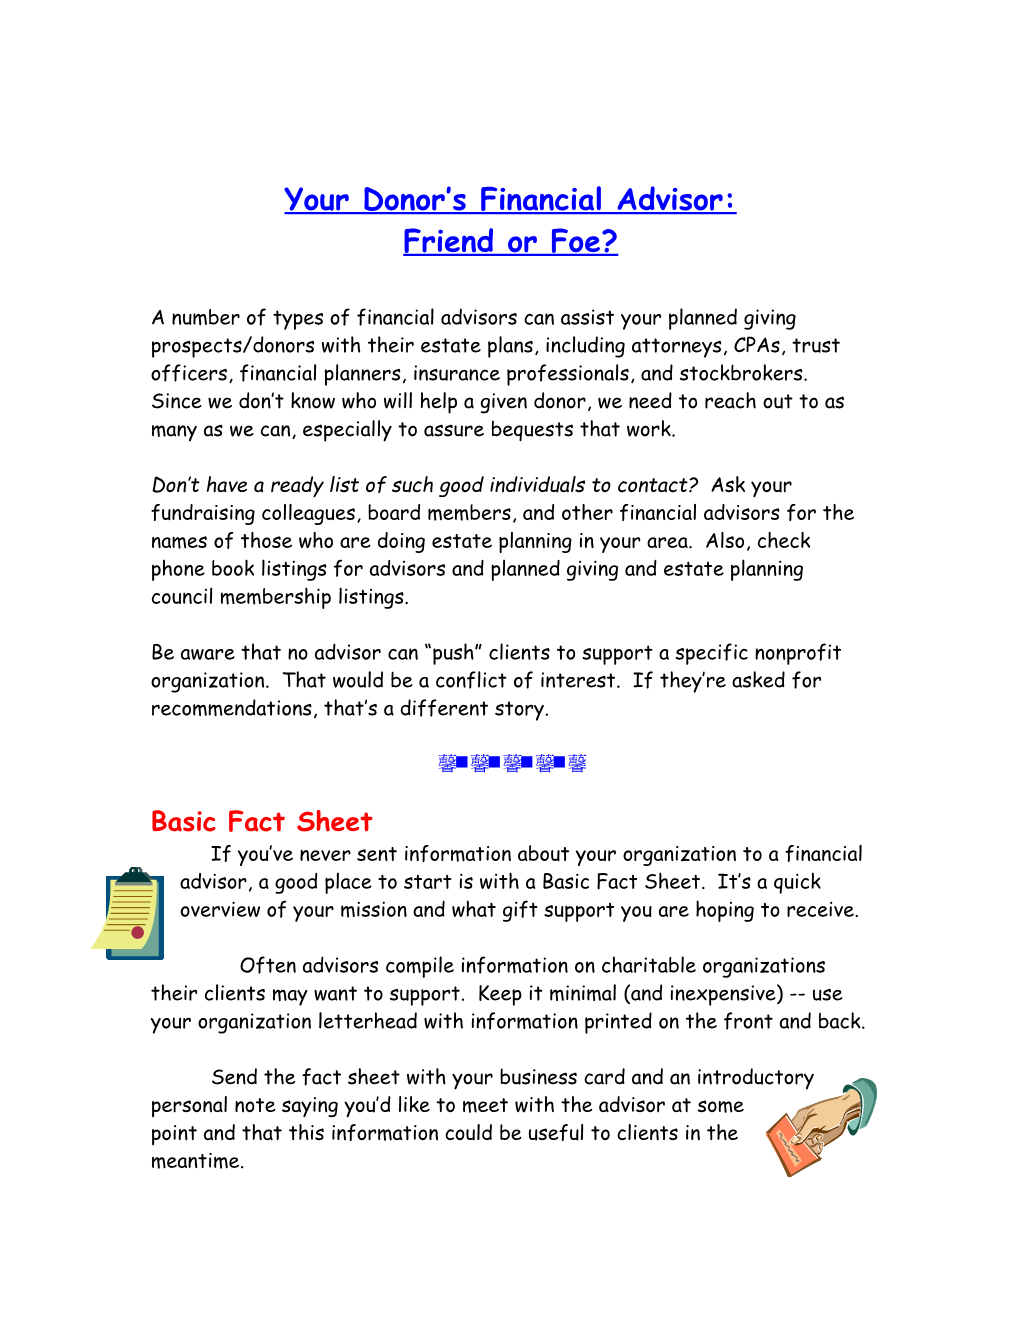 Forging Ties with Financial Advisors the Easy Way